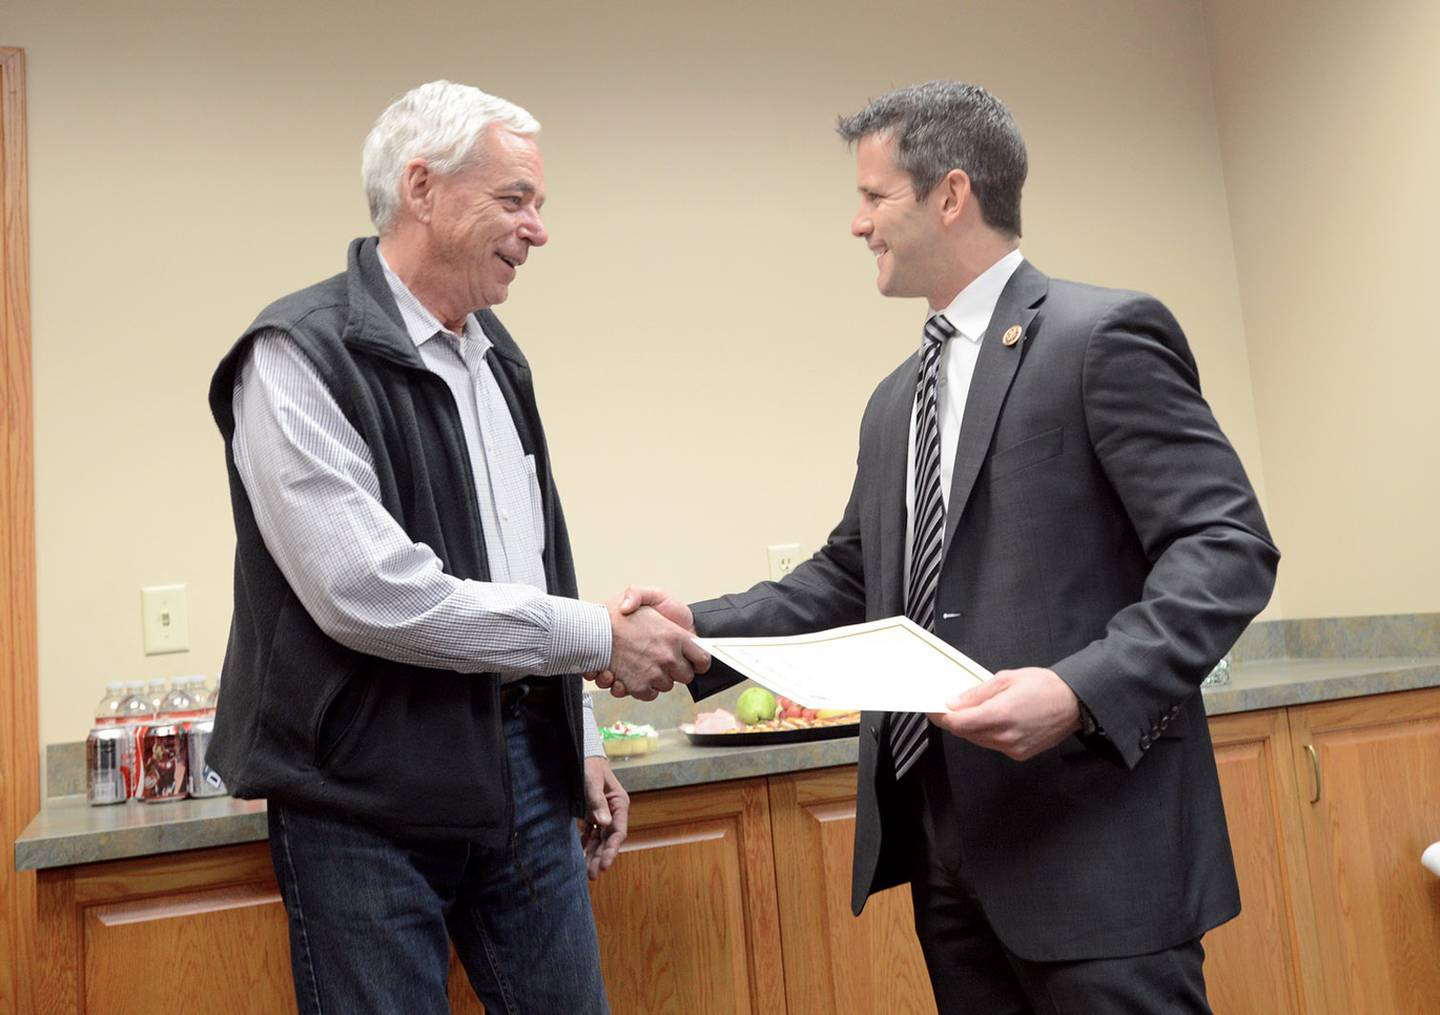 In this file photo, former Ottawa Building Official and Floodplain Manager Mike Sutfin shakes hands with former Congressman Adam Kinzinger, who congratulates him for helping the city obtain a CRS 2 rating, which means Ottawa is among the 10 most prepared cities in the country when it comes to flooding.